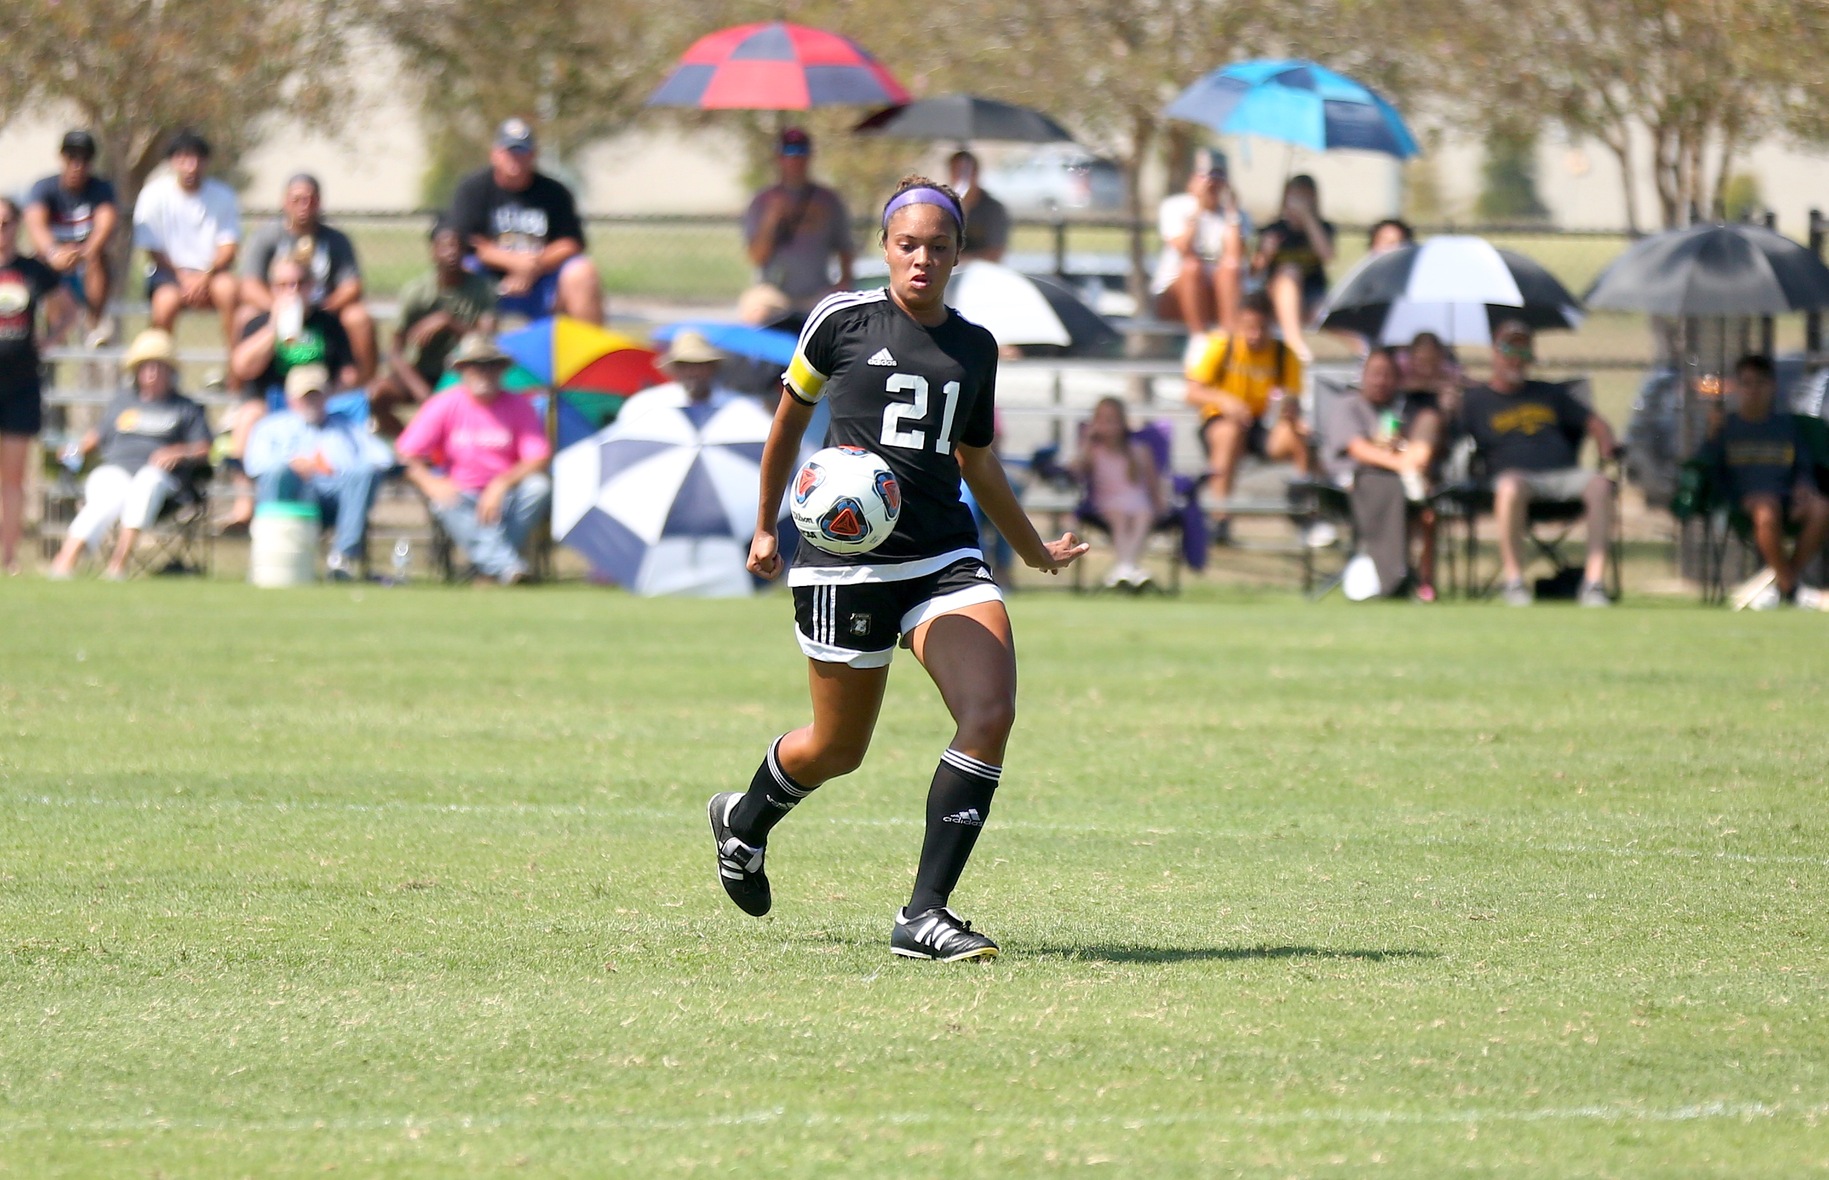 TLU Women's Soccer Drops SCAC Matchup To The University Of Dallas